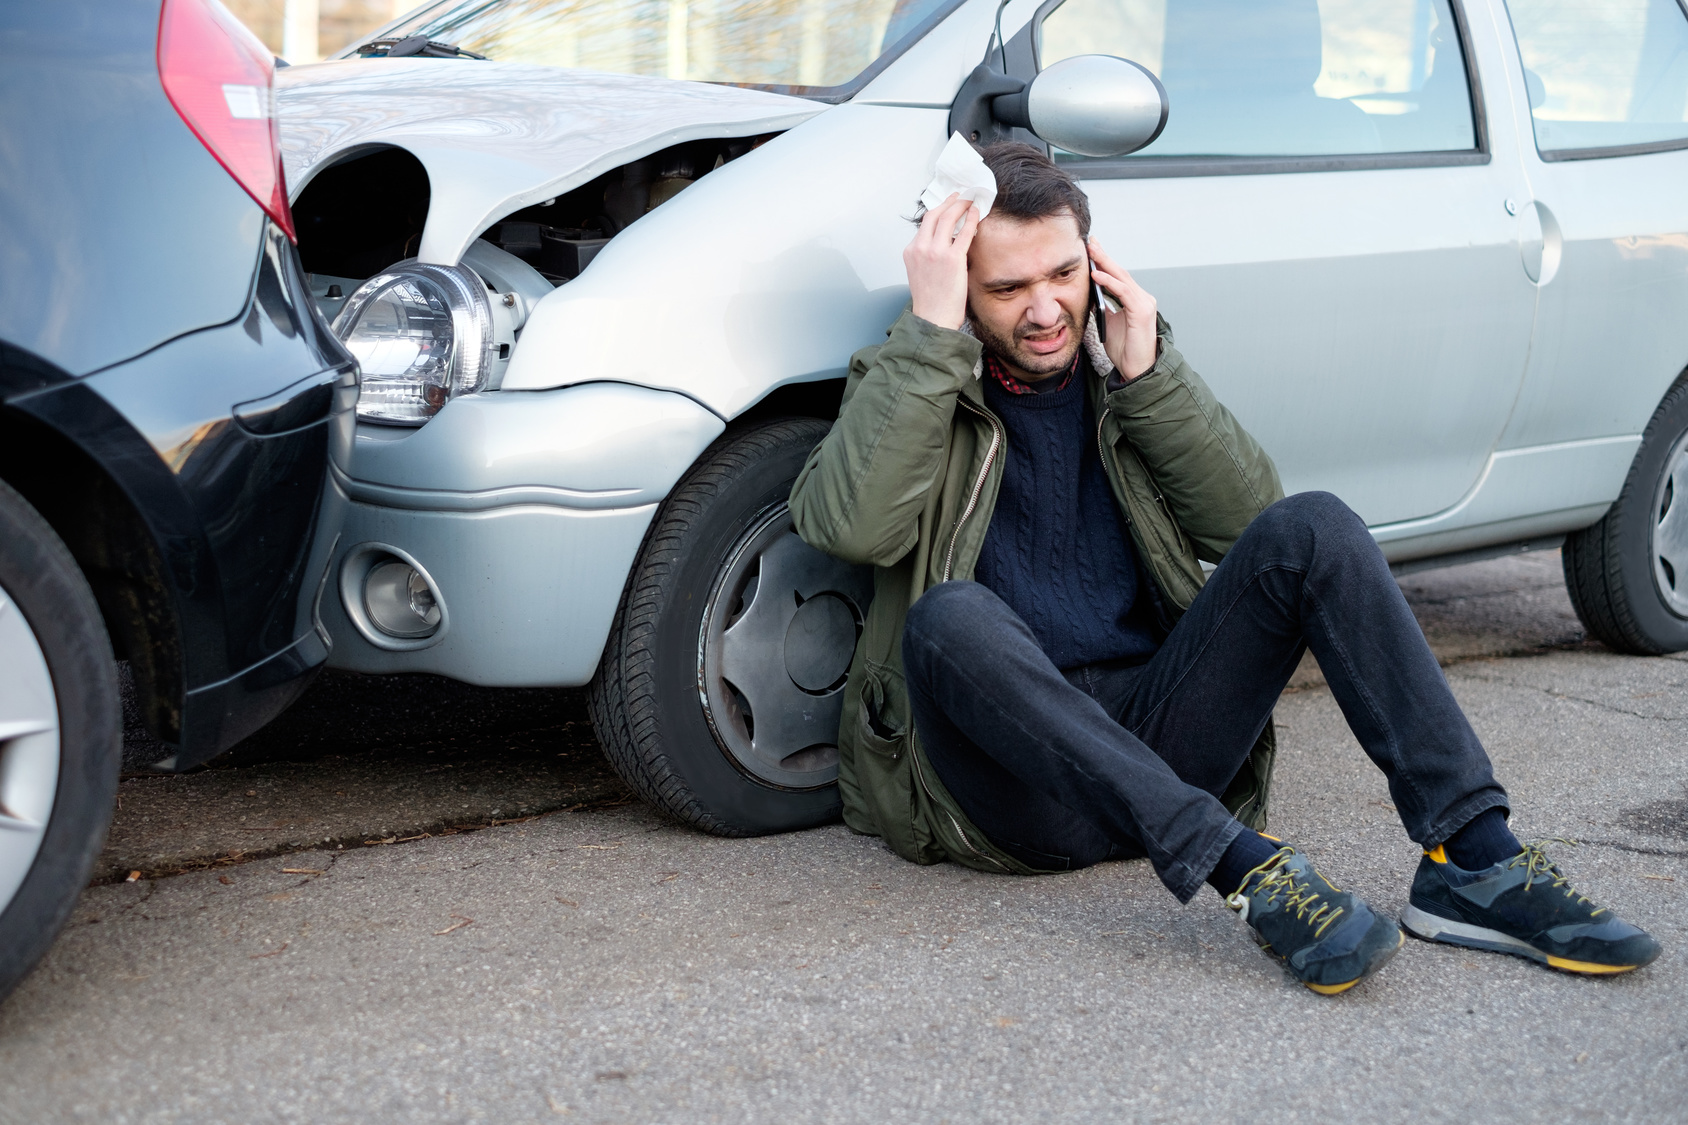 Dallas, TX Rear End Accident Law Firm | Dallas Car Accident Lawyers